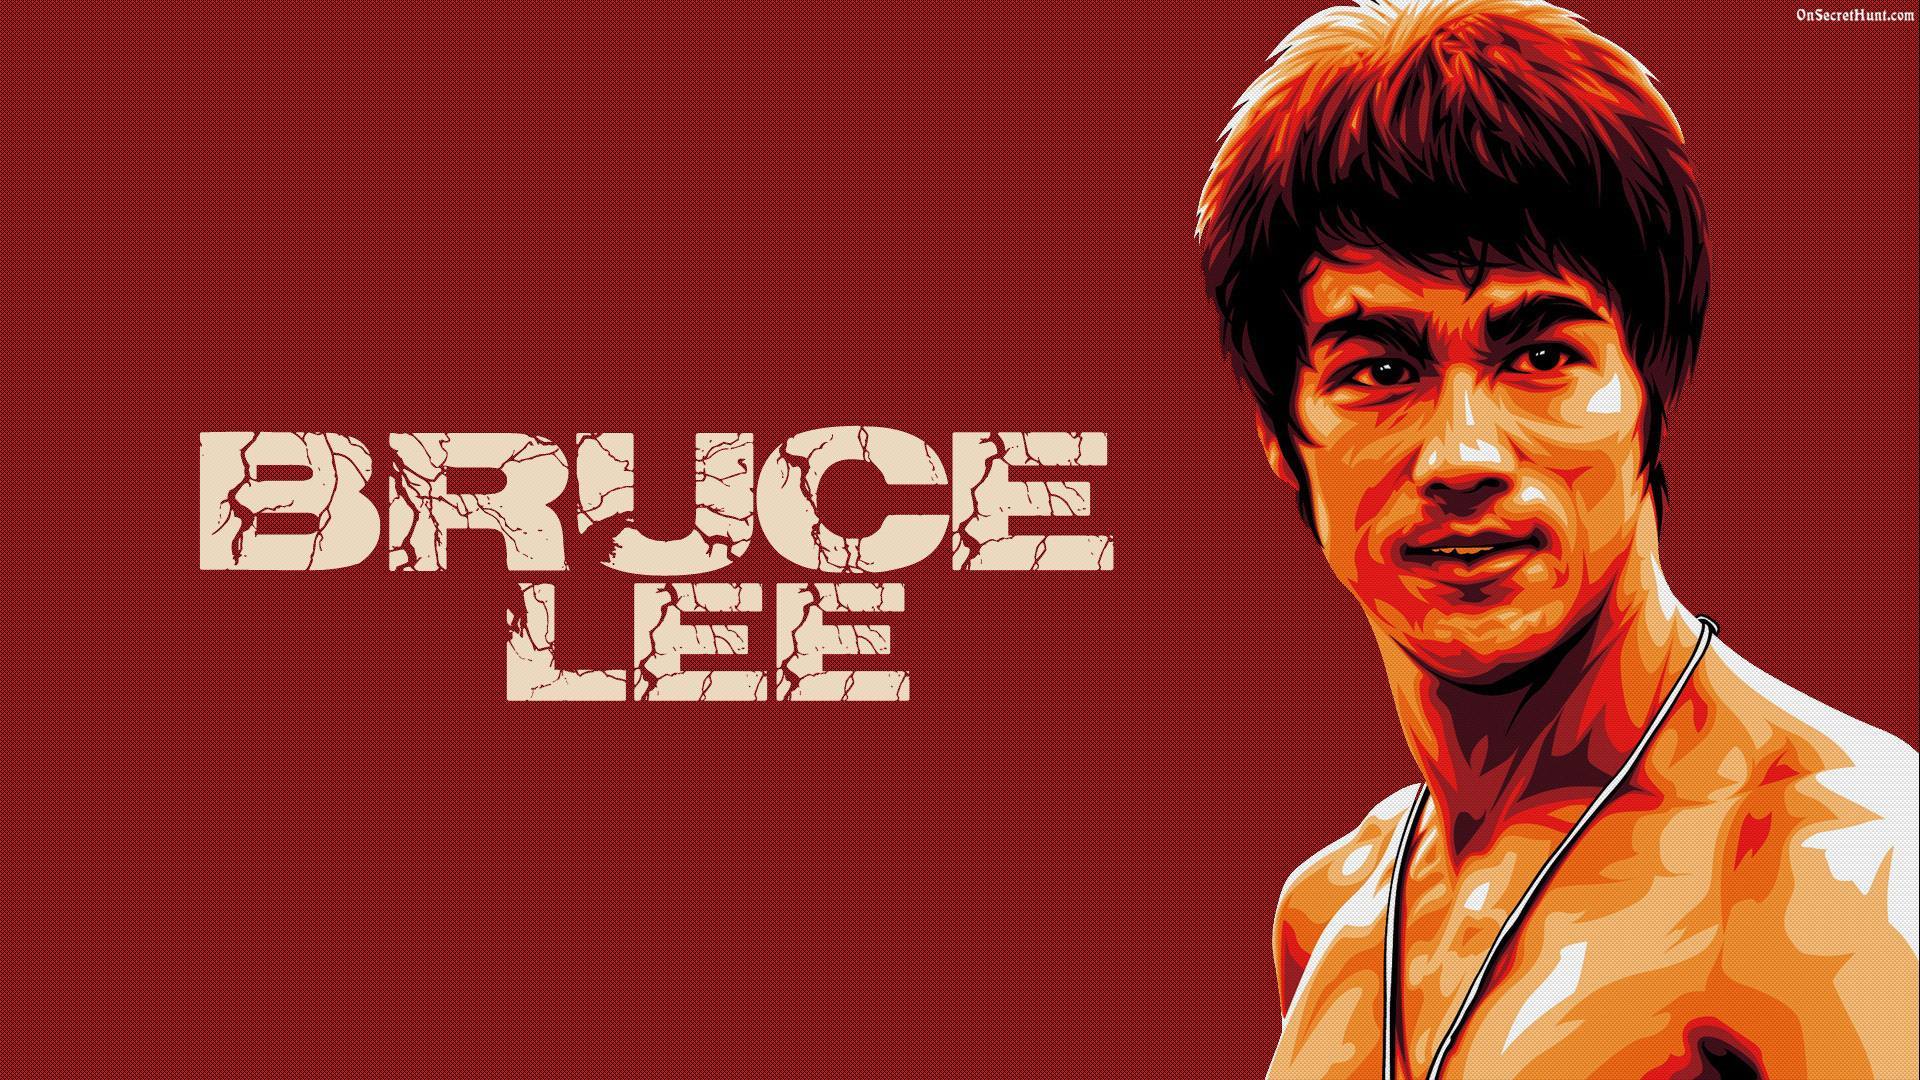 Bruce Lee HD Wallpaper for Free Download on MoboMarket 1024×768